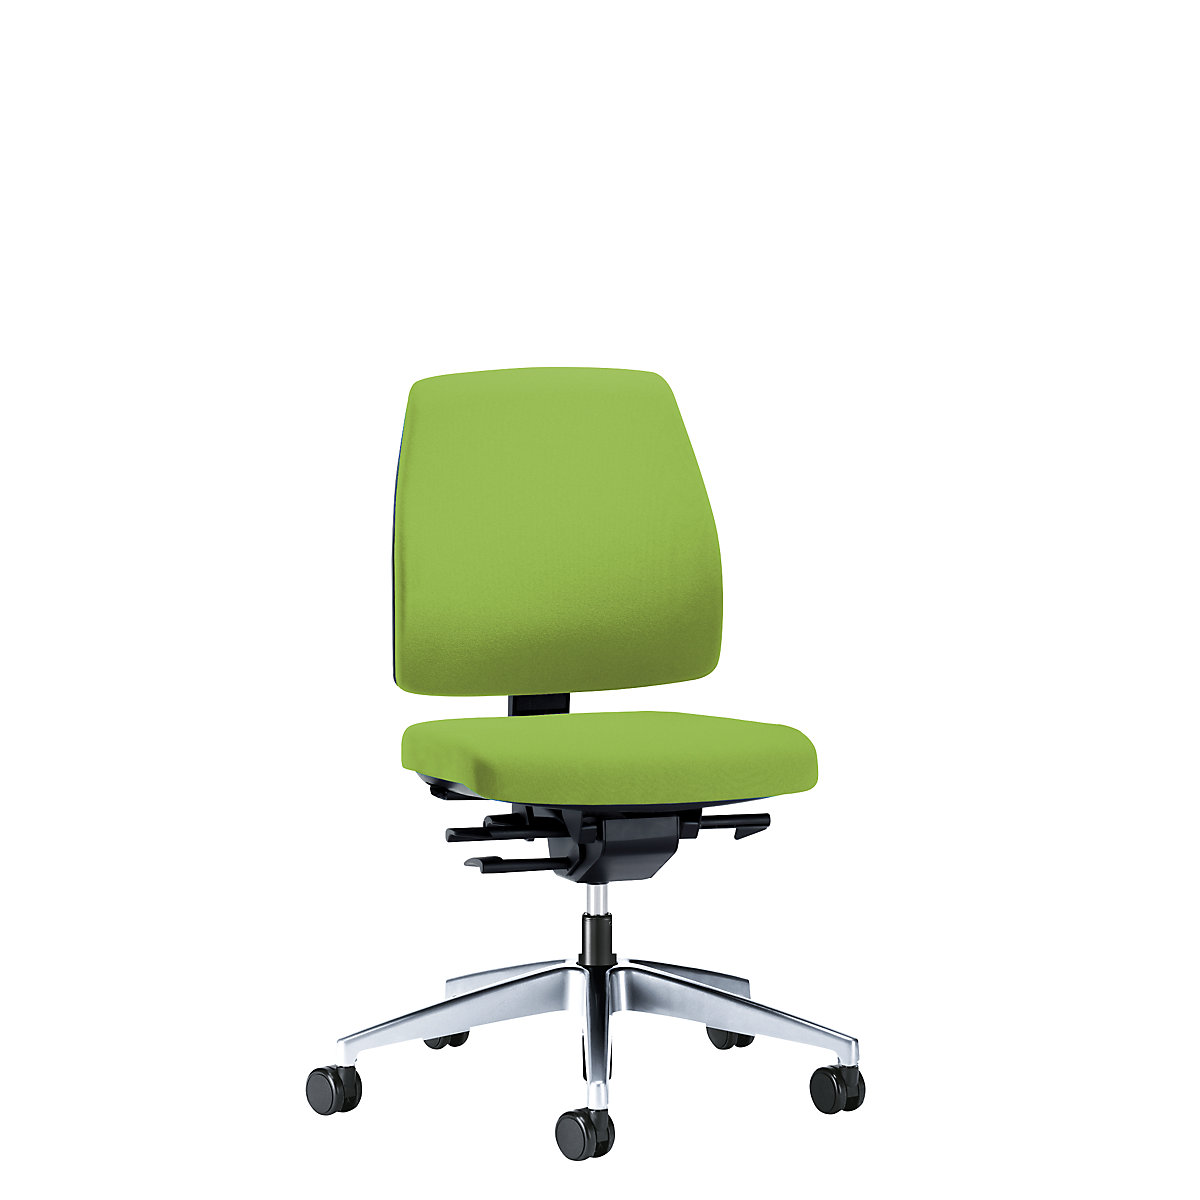 GOAL office swivel chair, back rest height 430 mm – interstuhl, polished frame, with hard castors, yellow green, seat depth 410 mm-2